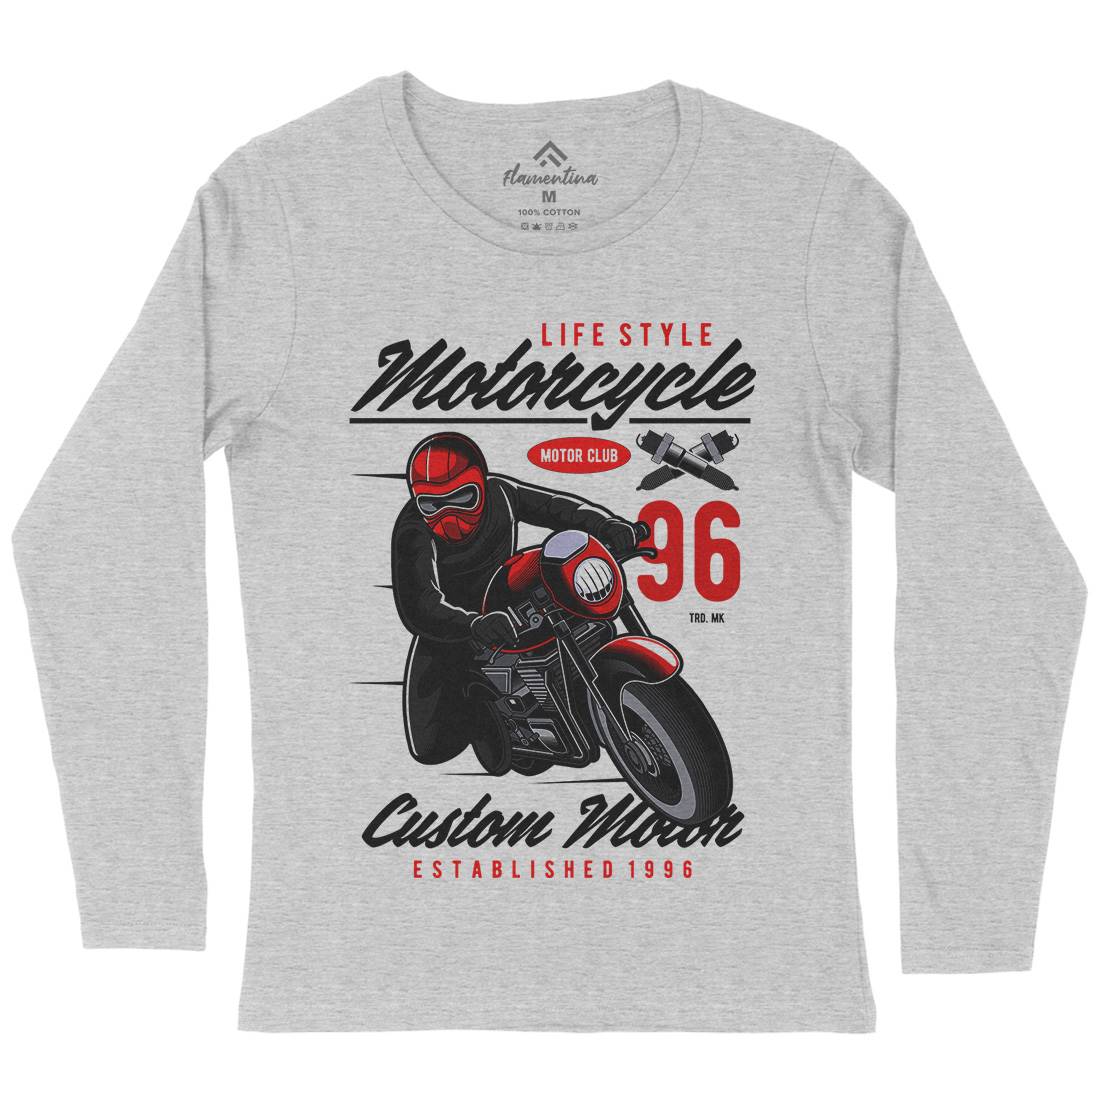 Lifestyle Womens Long Sleeve T-Shirt Motorcycles C399